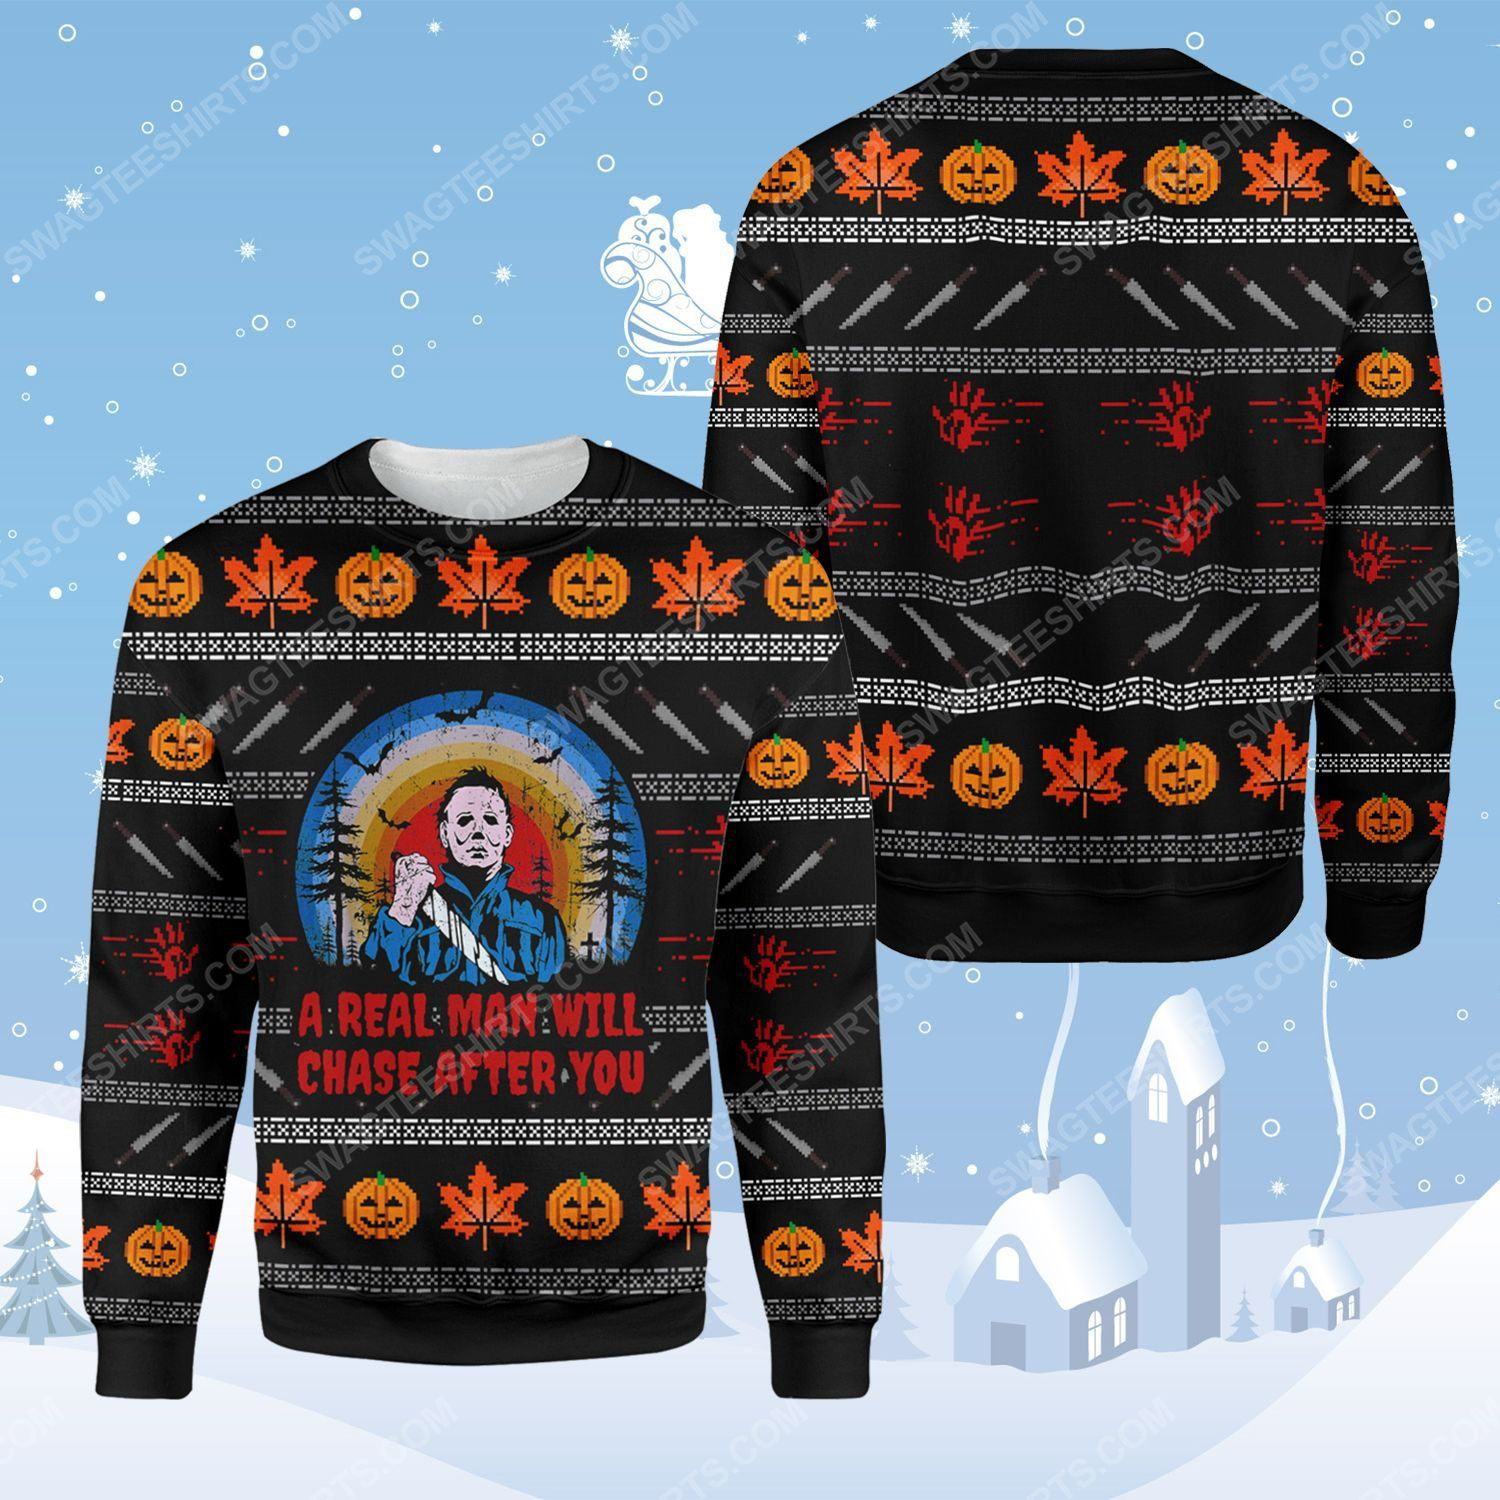 Michael myers a real man will chase after you ugly christmas sweater - Copy (2)